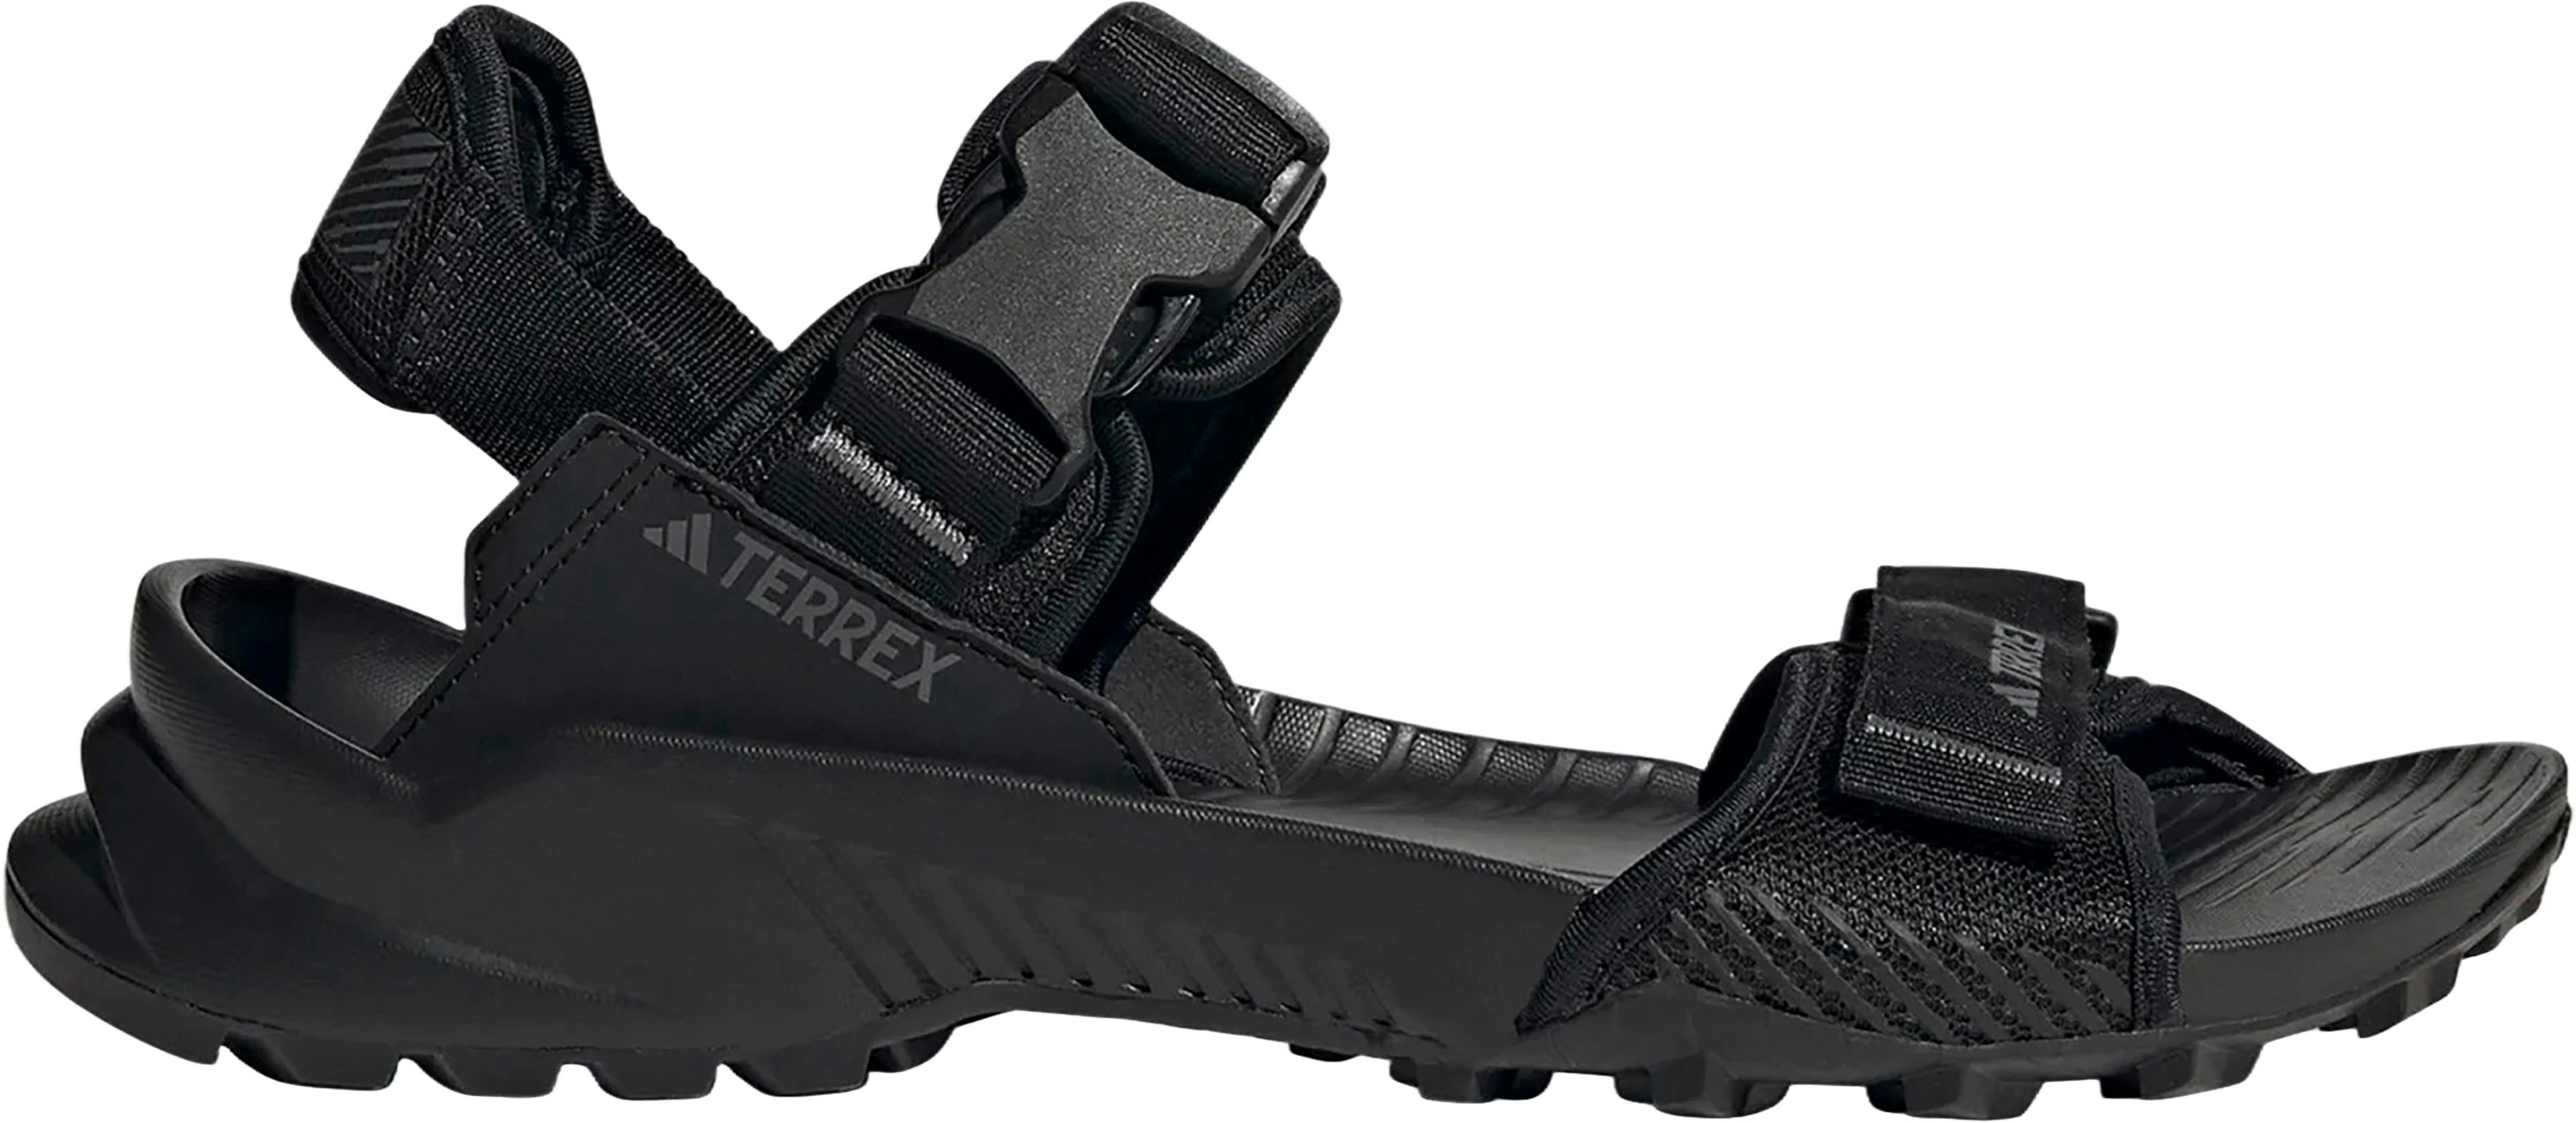 Product image for Terrex Hydroterra Sandals - Unisex